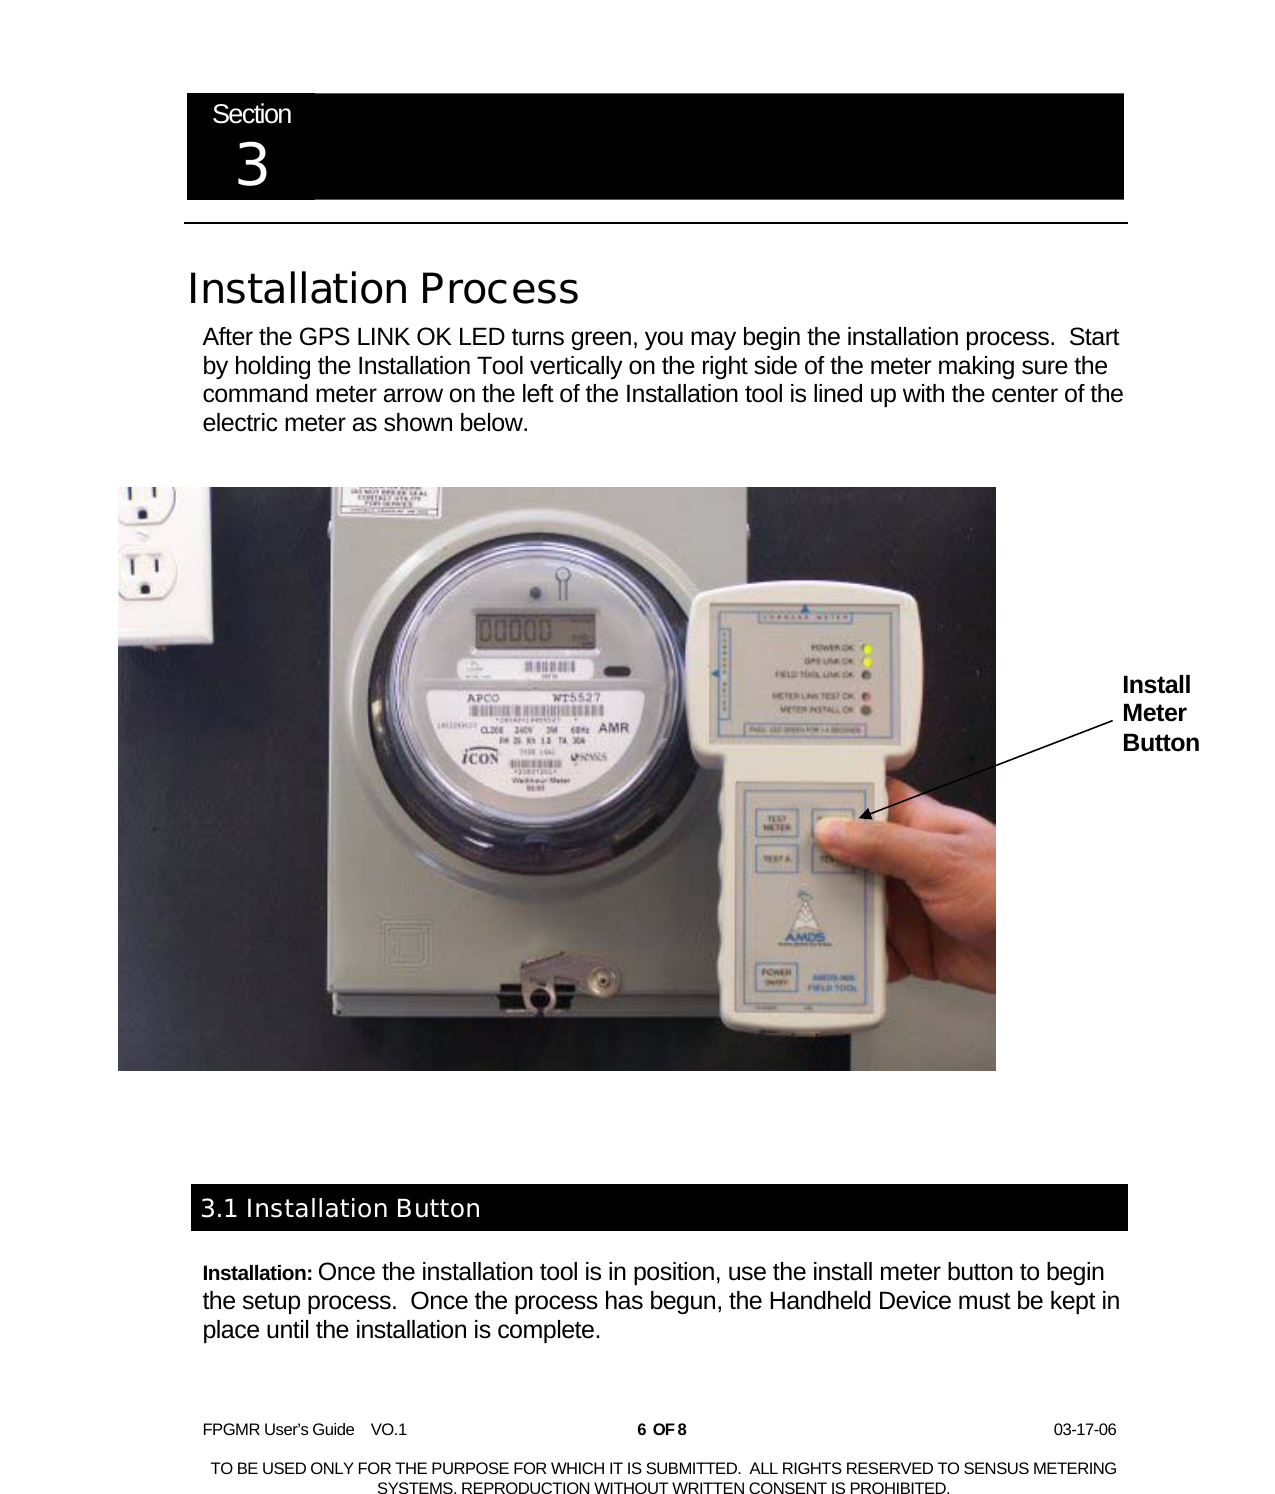  FPGMR User’s Guide    VO.1       6  OF 8                    03-17-06  TO BE USED ONLY FOR THE PURPOSE FOR WHICH IT IS SUBMITTED.  ALL RIGHTS RESERVED TO SENSUS METERING SYSTEMS. REPRODUCTION WITHOUT WRITTEN CONSENT IS PROHIBITED.  Section 3   Installation Process After the GPS LINK OK LED turns green, you may begin the installation process.  Start by holding the Installation Tool vertically on the right side of the meter making sure the command meter arrow on the left of the Installation tool is lined up with the center of the electric meter as shown below.   3.1 Installation Button Installation: Once the installation tool is in position, use the install meter button to begin the setup process.  Once the process has begun, the Handheld Device must be kept in place until the installation is complete.    Install Meter Button 